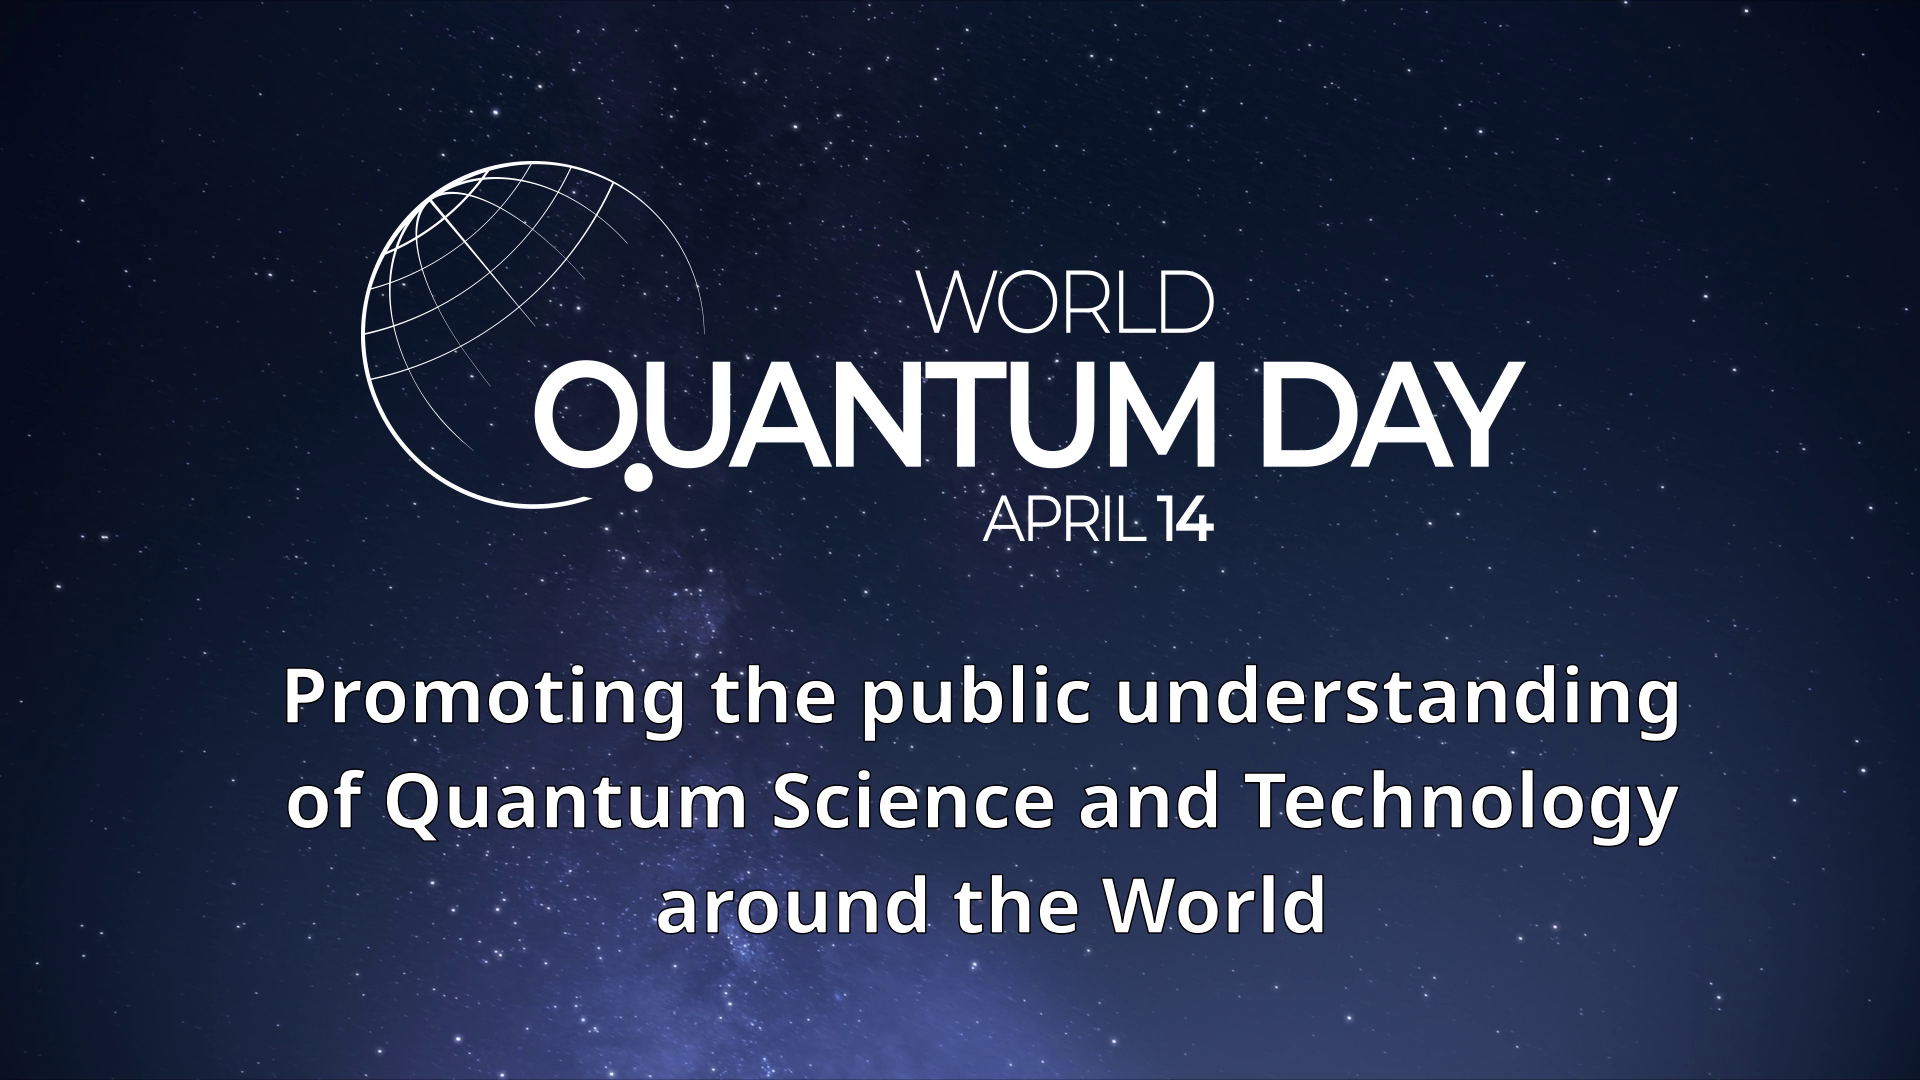 World Quantum Day call for action